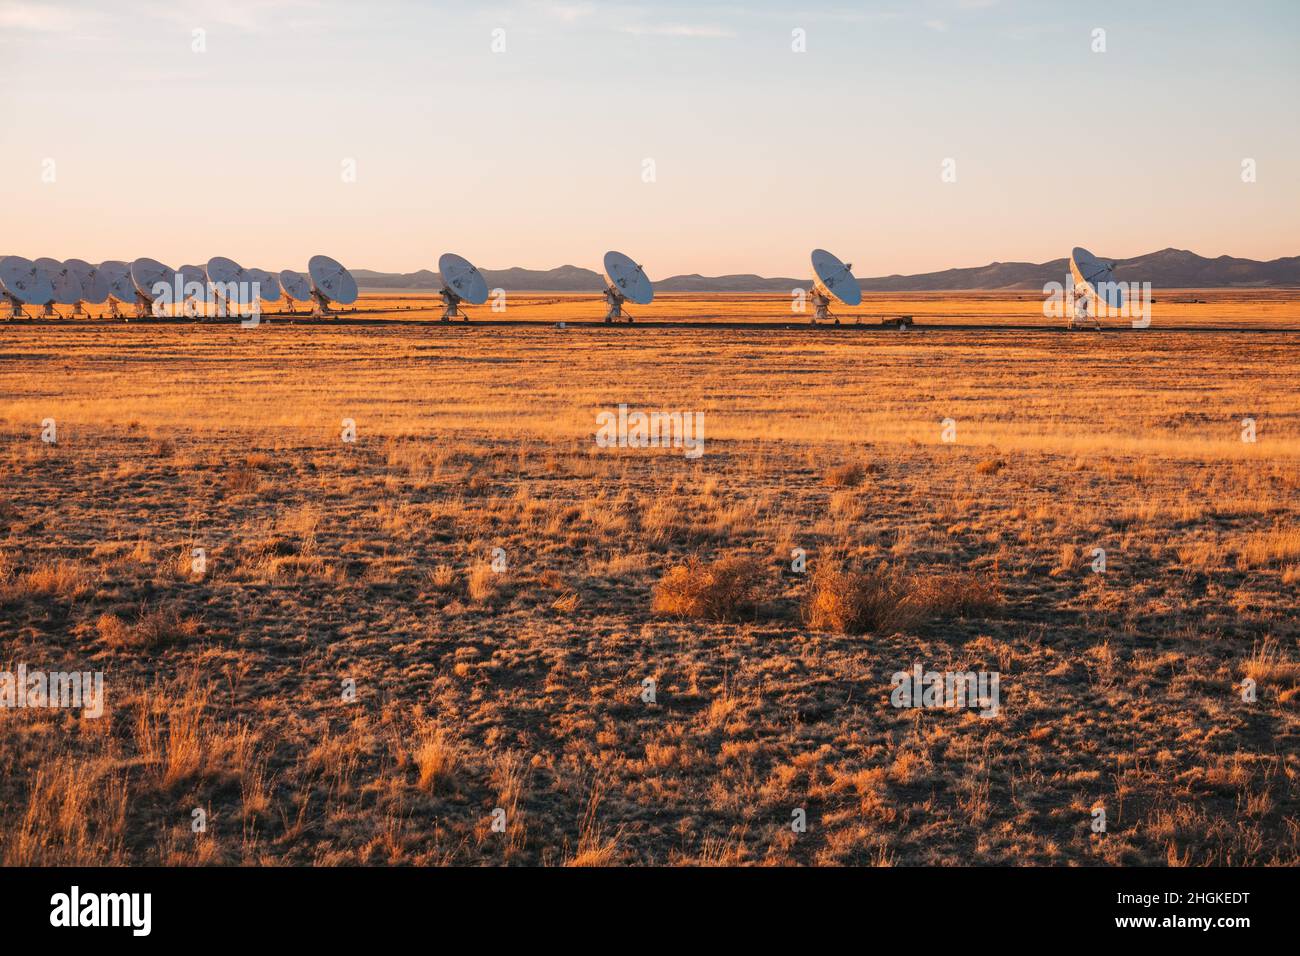 Radio telescope dishes stacked together at the Karl G. Jansky Very Large Array on the Plains of San Agustin, New Mexico Stock Photo